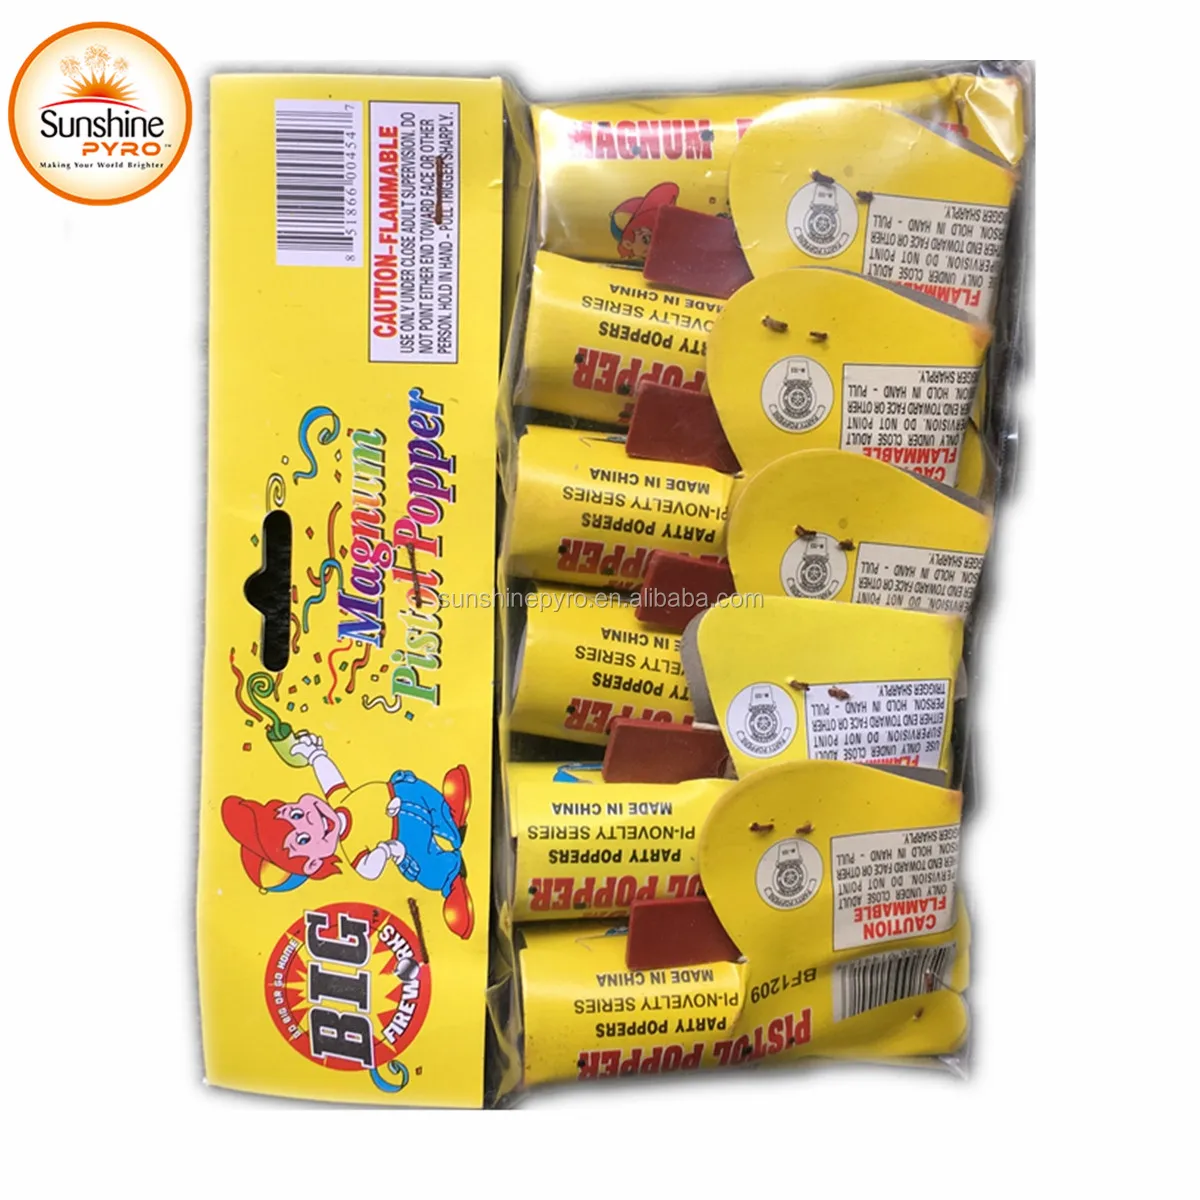 Magnum Pistol Christmas Party Popper Confetti Bomb Toy Firework View Magnum Party Popper Sunshinepyro Product Details From Liuyang Sunshine Pyrotechinics Co Ltd On Alibaba Com